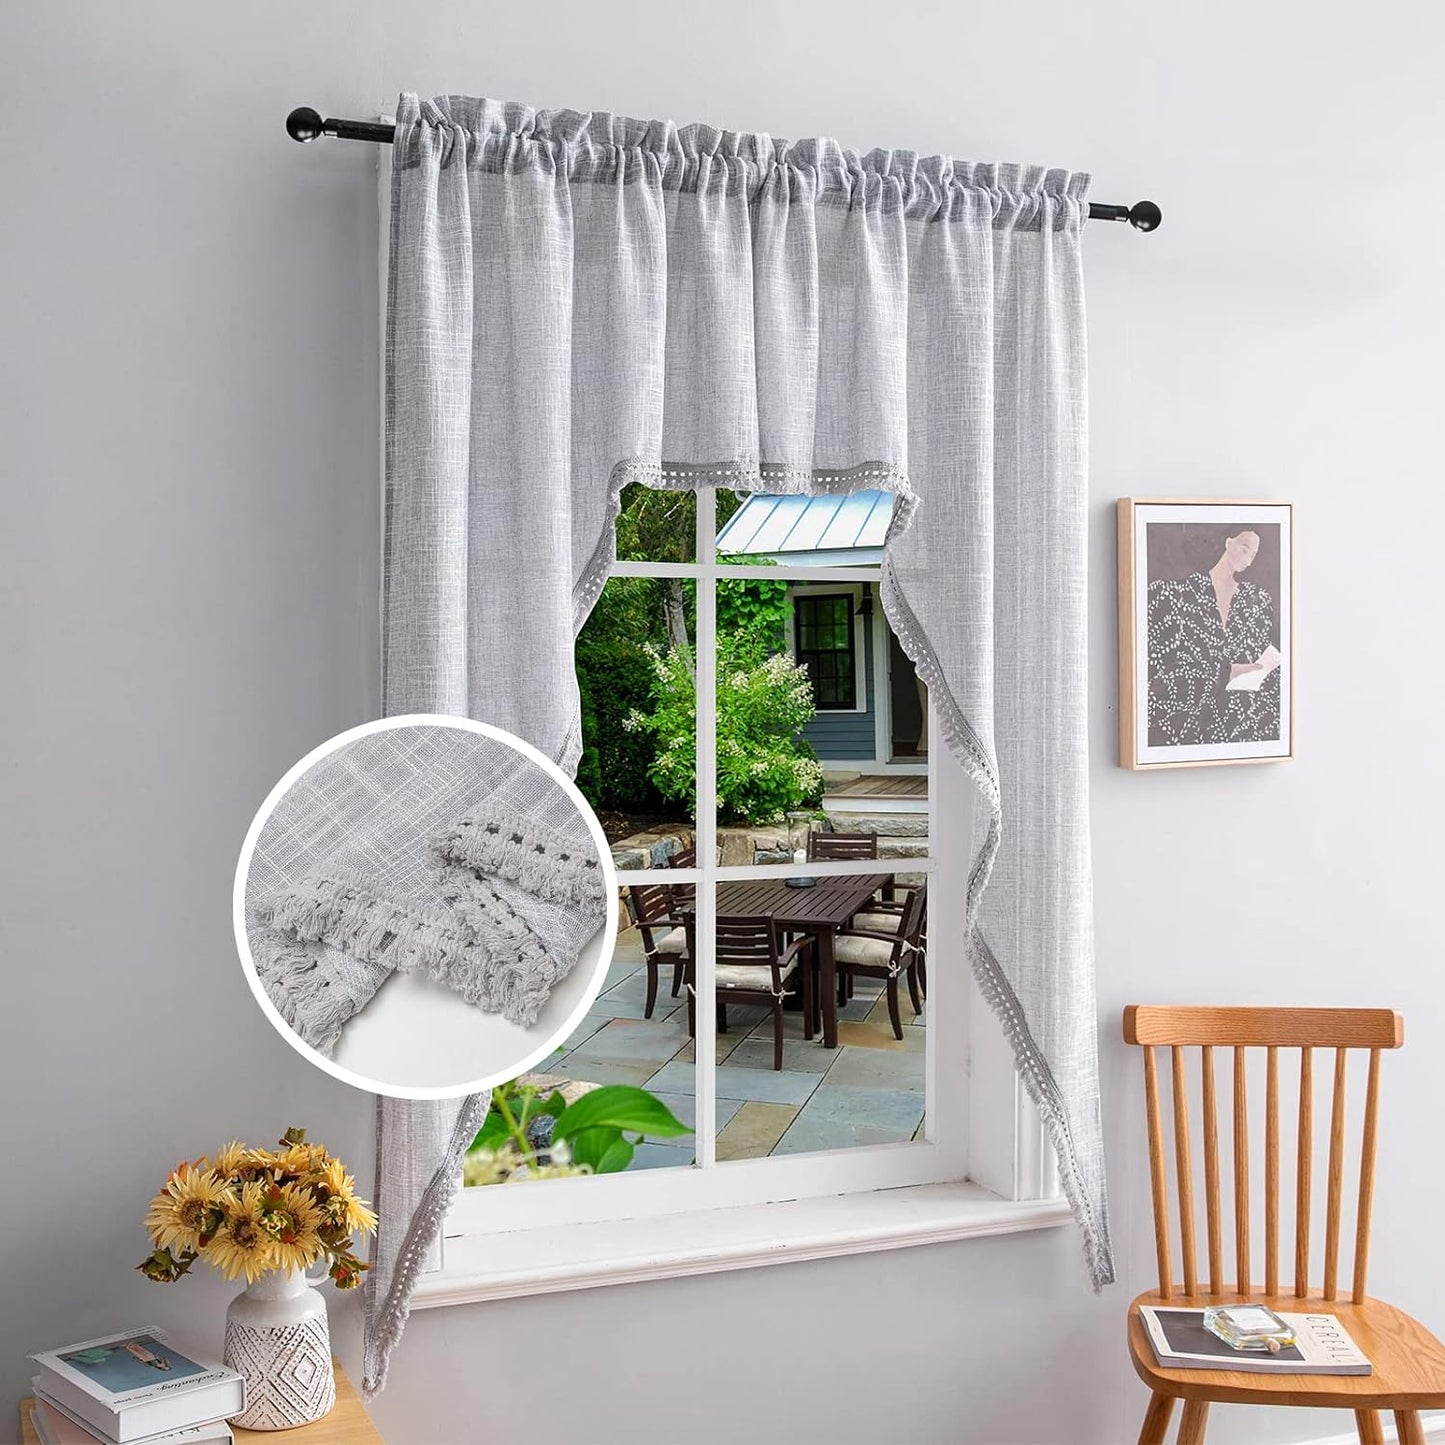 Beda Home Tassel Linen Textured Swag Curtain Valance for Farmhouses’ Kitchen; Light Filtering Rustic Short Swag Topper for Small Windows Bedroom Privacy Added Rod Pocket Design(Nature 36X63-2Pcs)  BD BEDA HOME Light Grey 36Wx63L - 2 Panels 